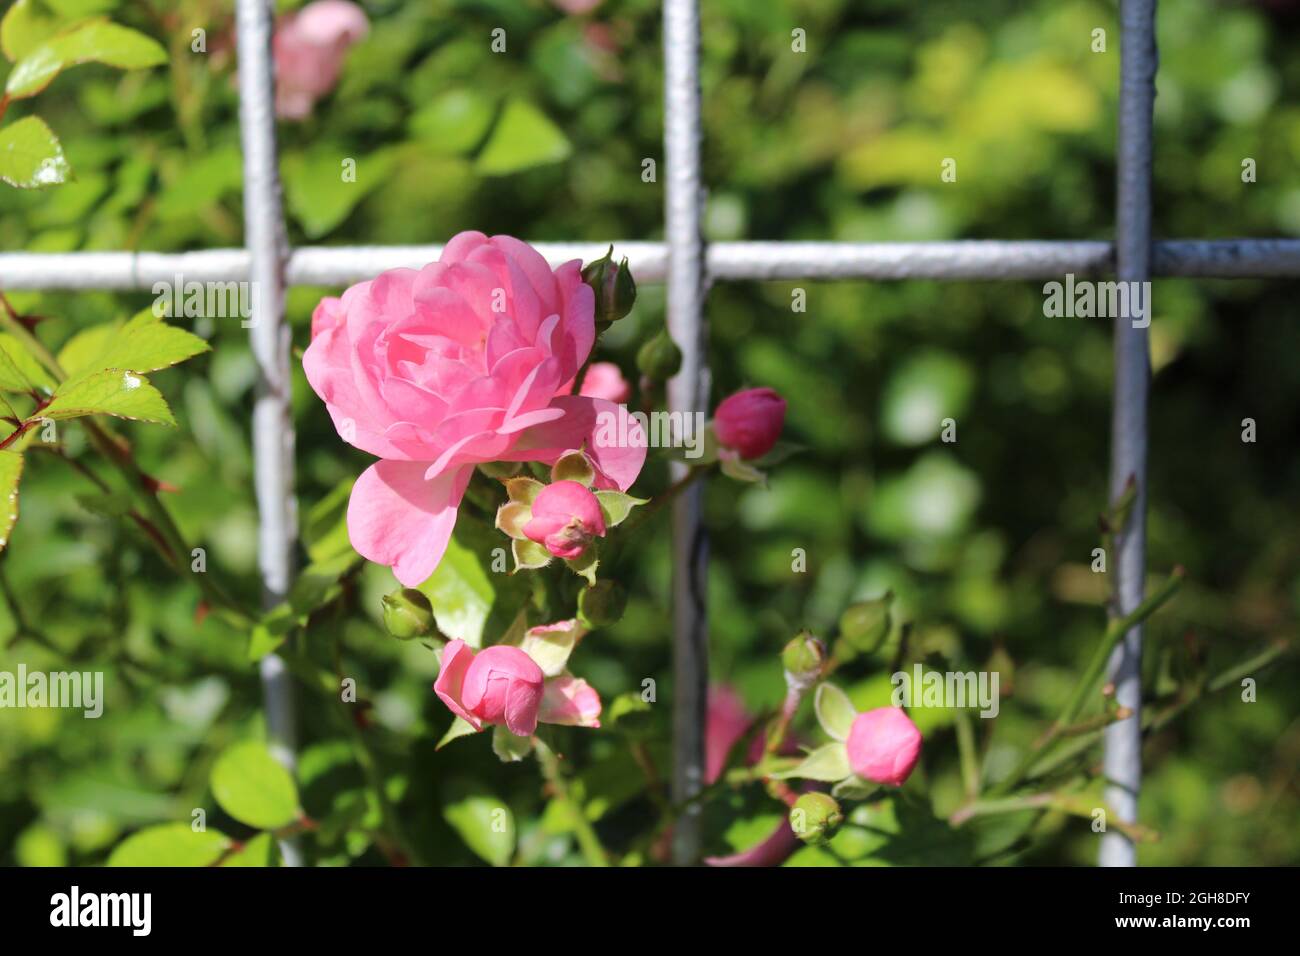 Bonica 82, shrub rose cultivar from France, the rose grows through the fence Stock Photo